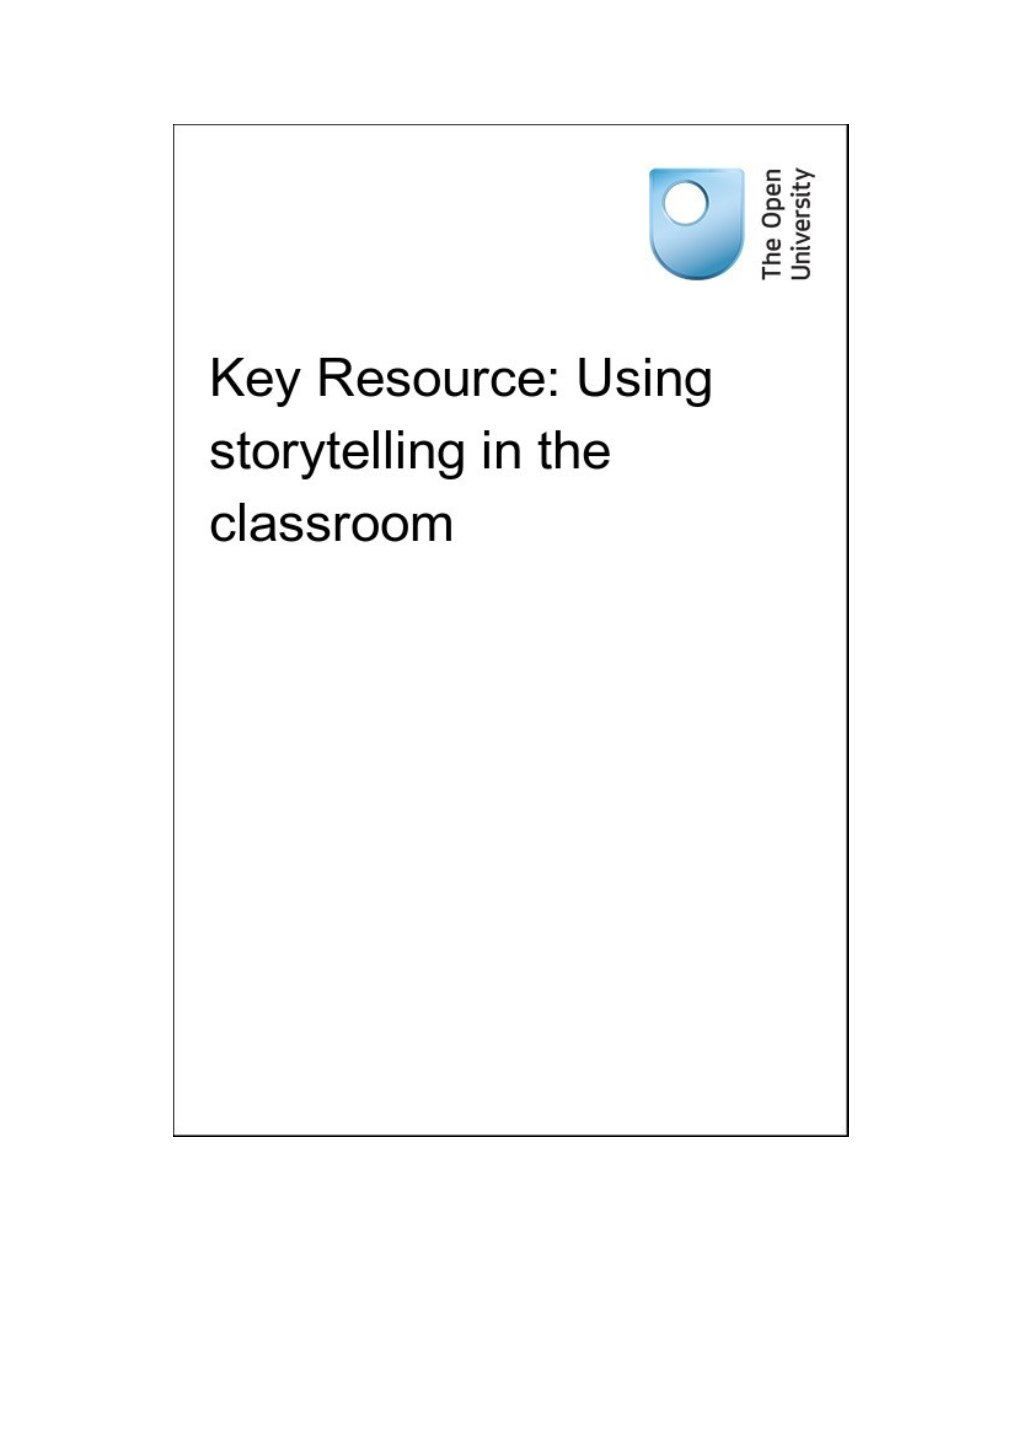 Key Resource: Using Storytelling in the Classroom